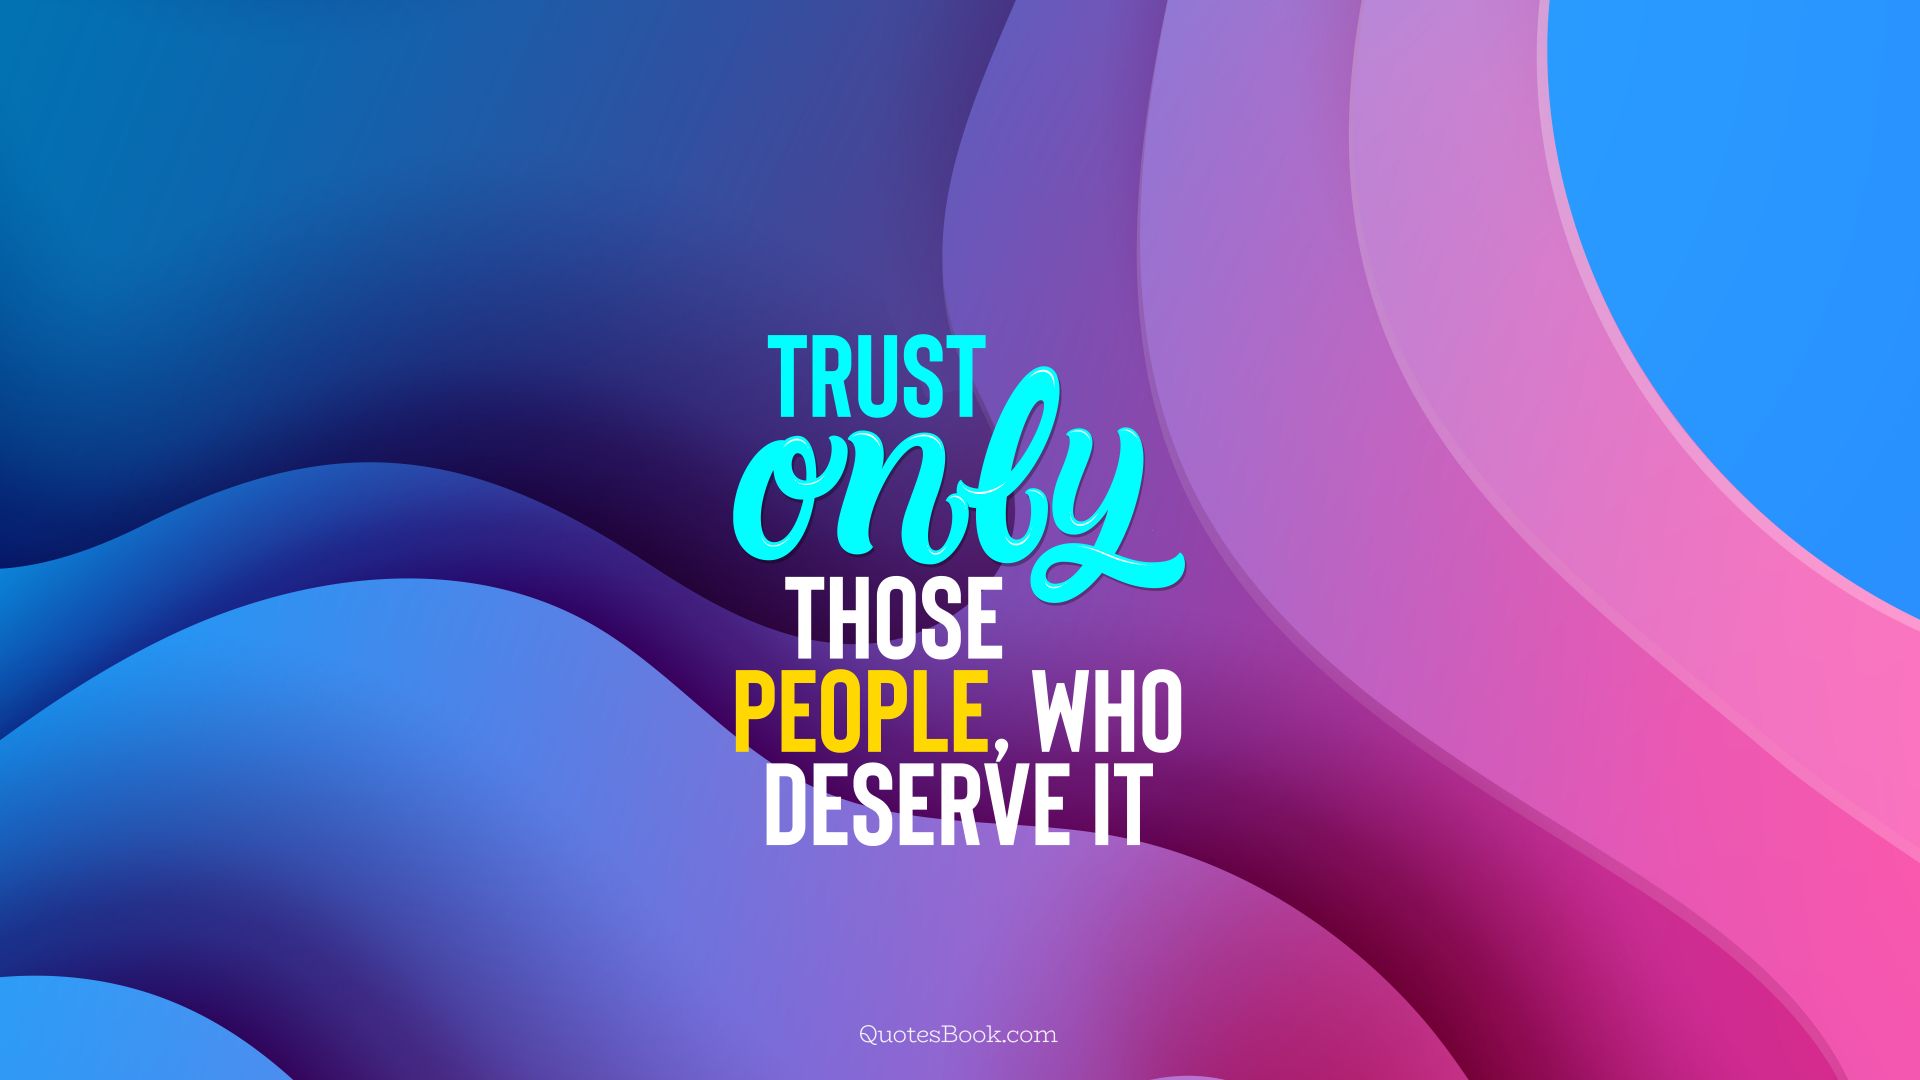 Trust only those people, who deserve it. - Quote by QuotesBook